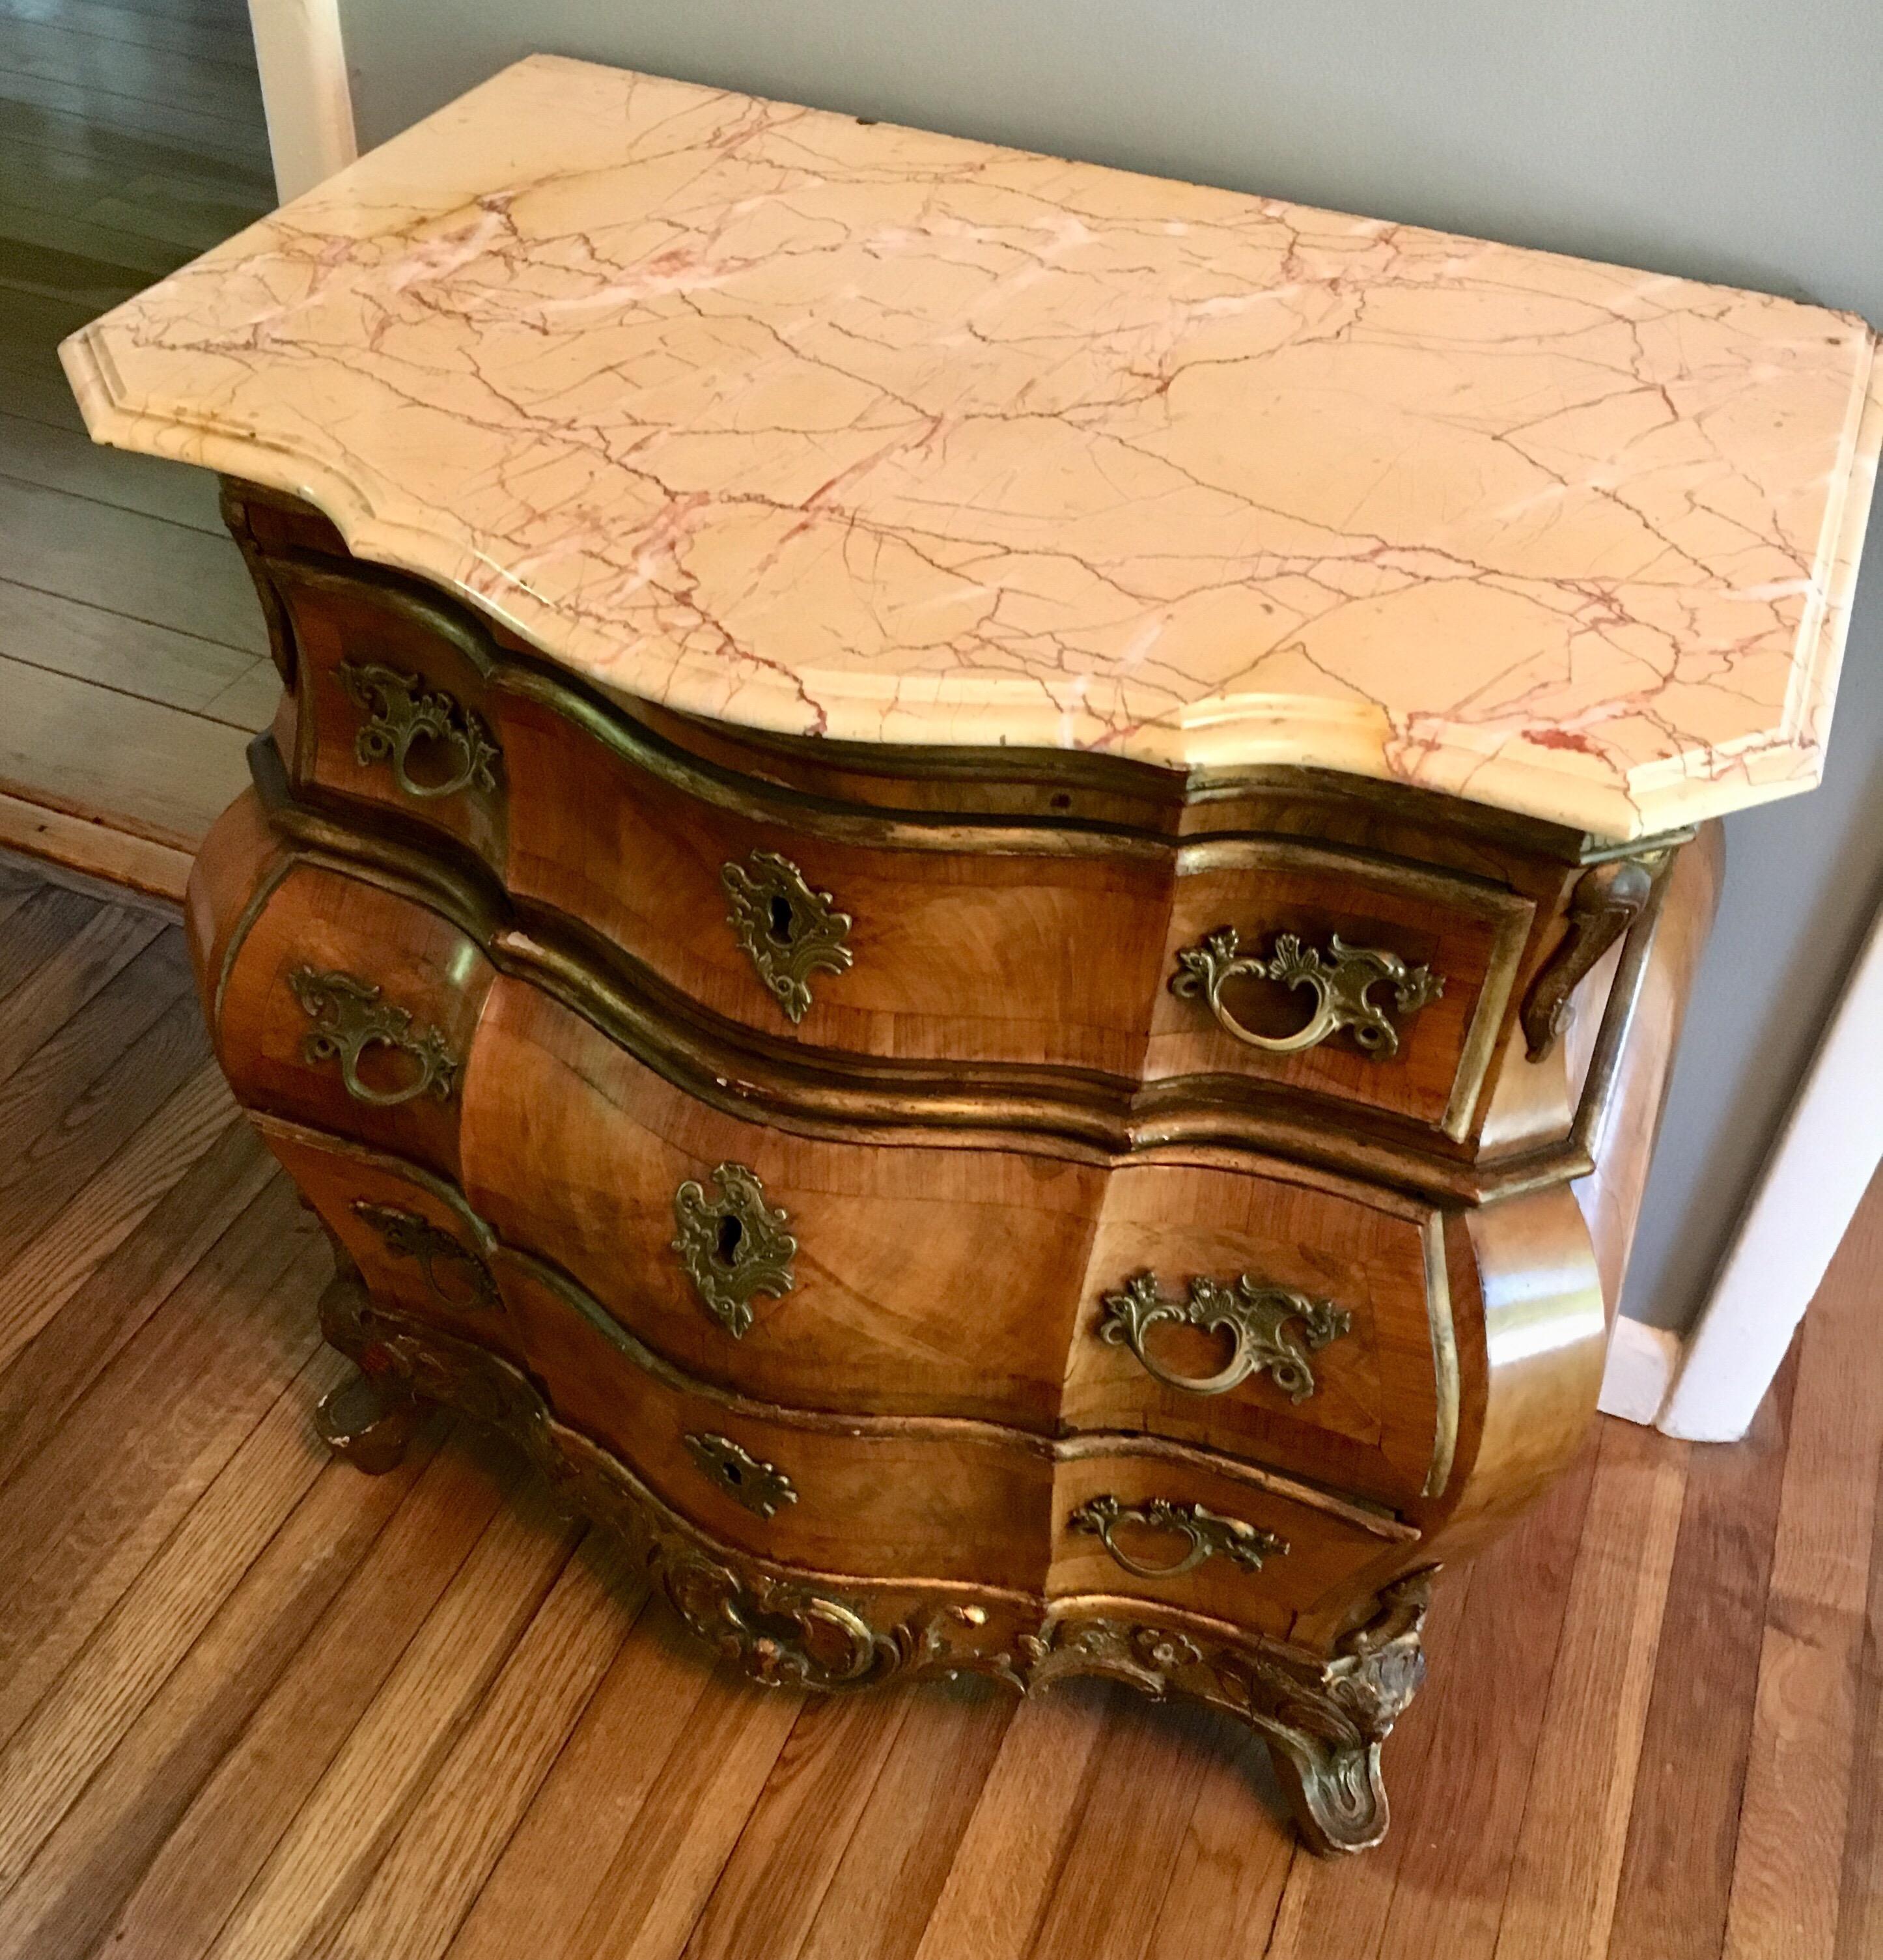 Gorgeous antique 19th century Danish 'Bombe' commode of walnut with parcel gilt carving. In the Rococo style of 18th century Royal furniture-maker Mathias Ortmann. Sumptuous detailing and lustrous patina. Pretty pink veined marble top (later date).